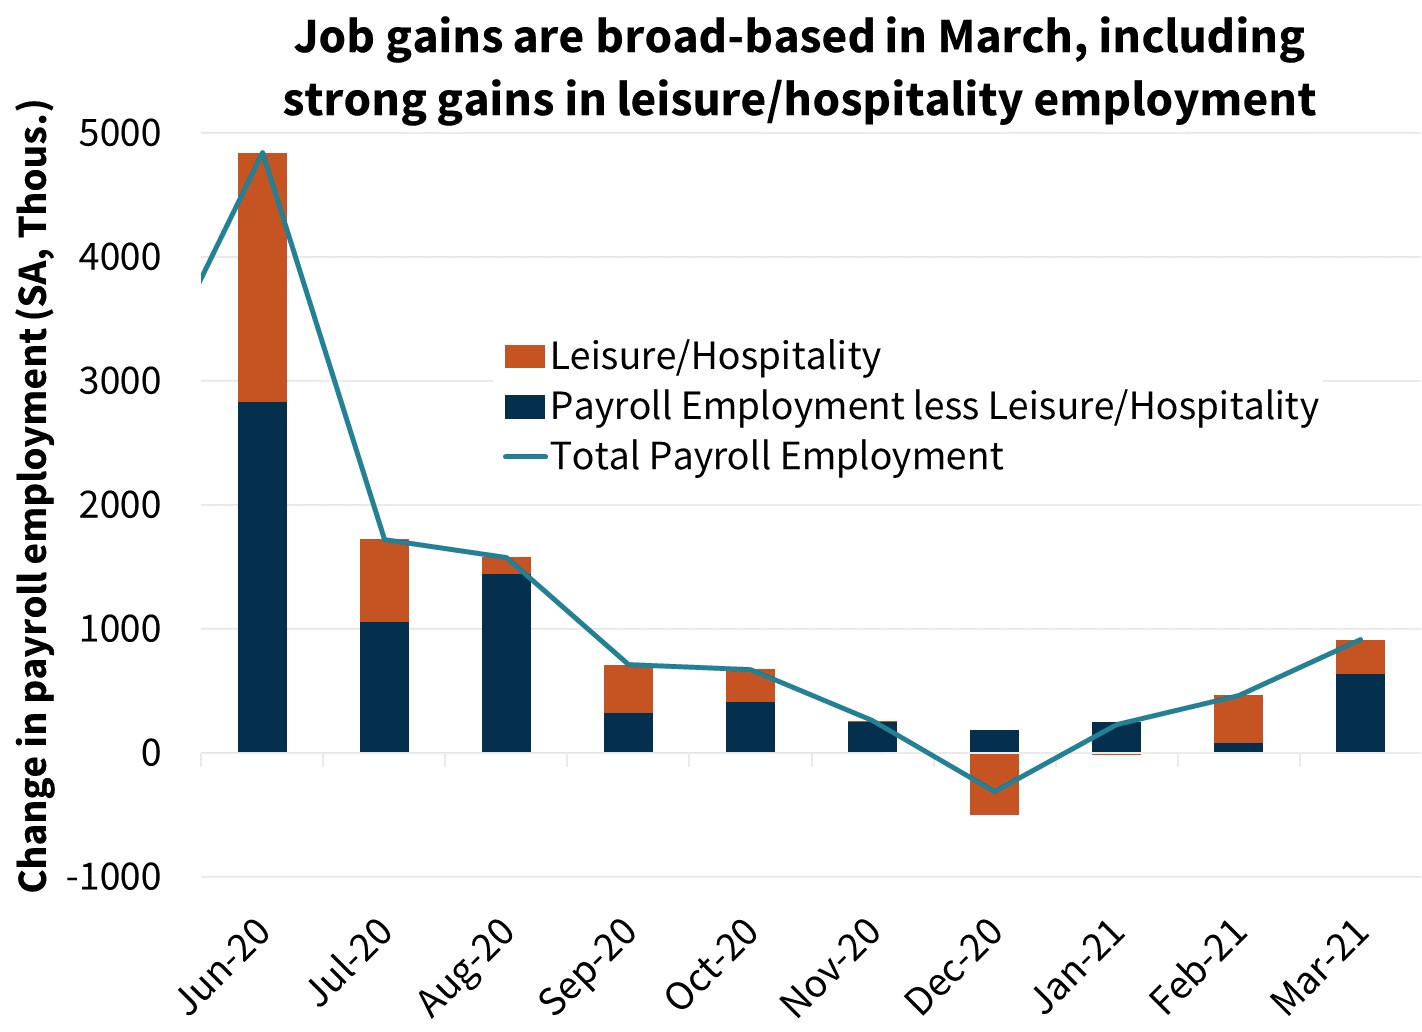  Job gains are broad-based in March, including strong gains in leisure/hospitality employment
